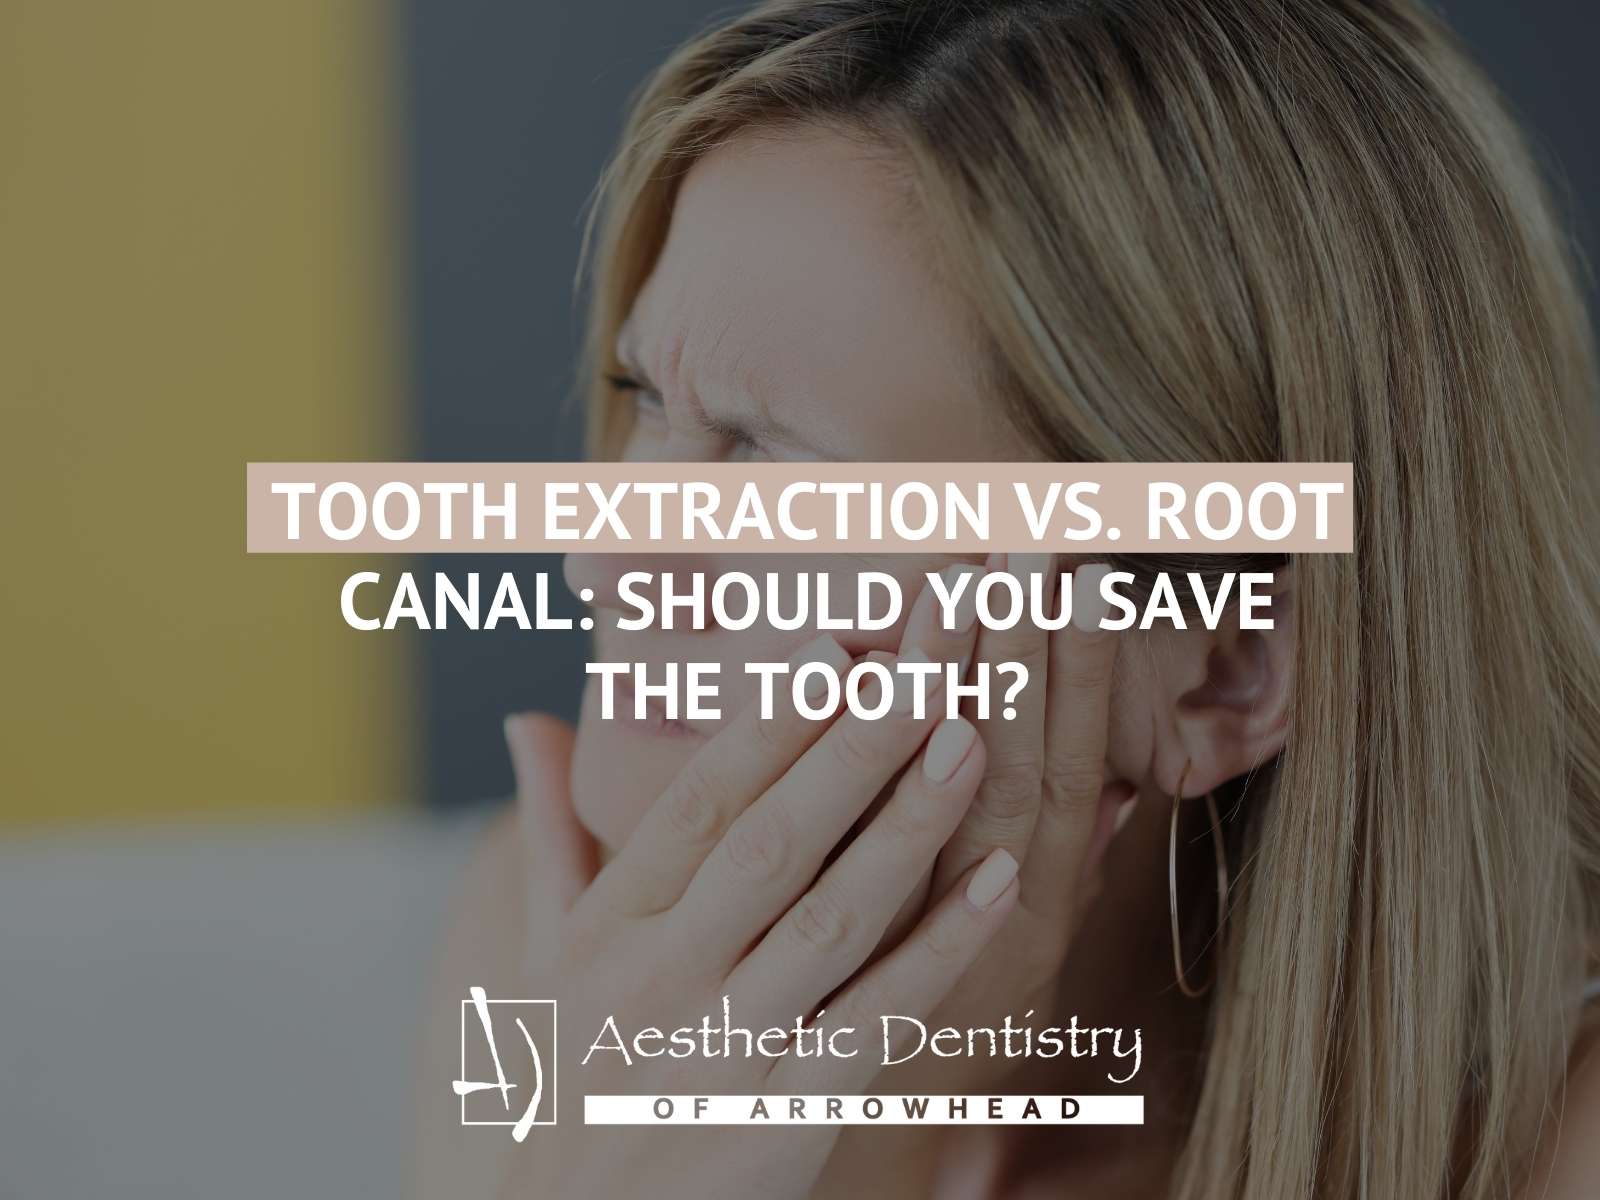 Tooth Extraction Vs. Root Canal Should You Save The Tooth